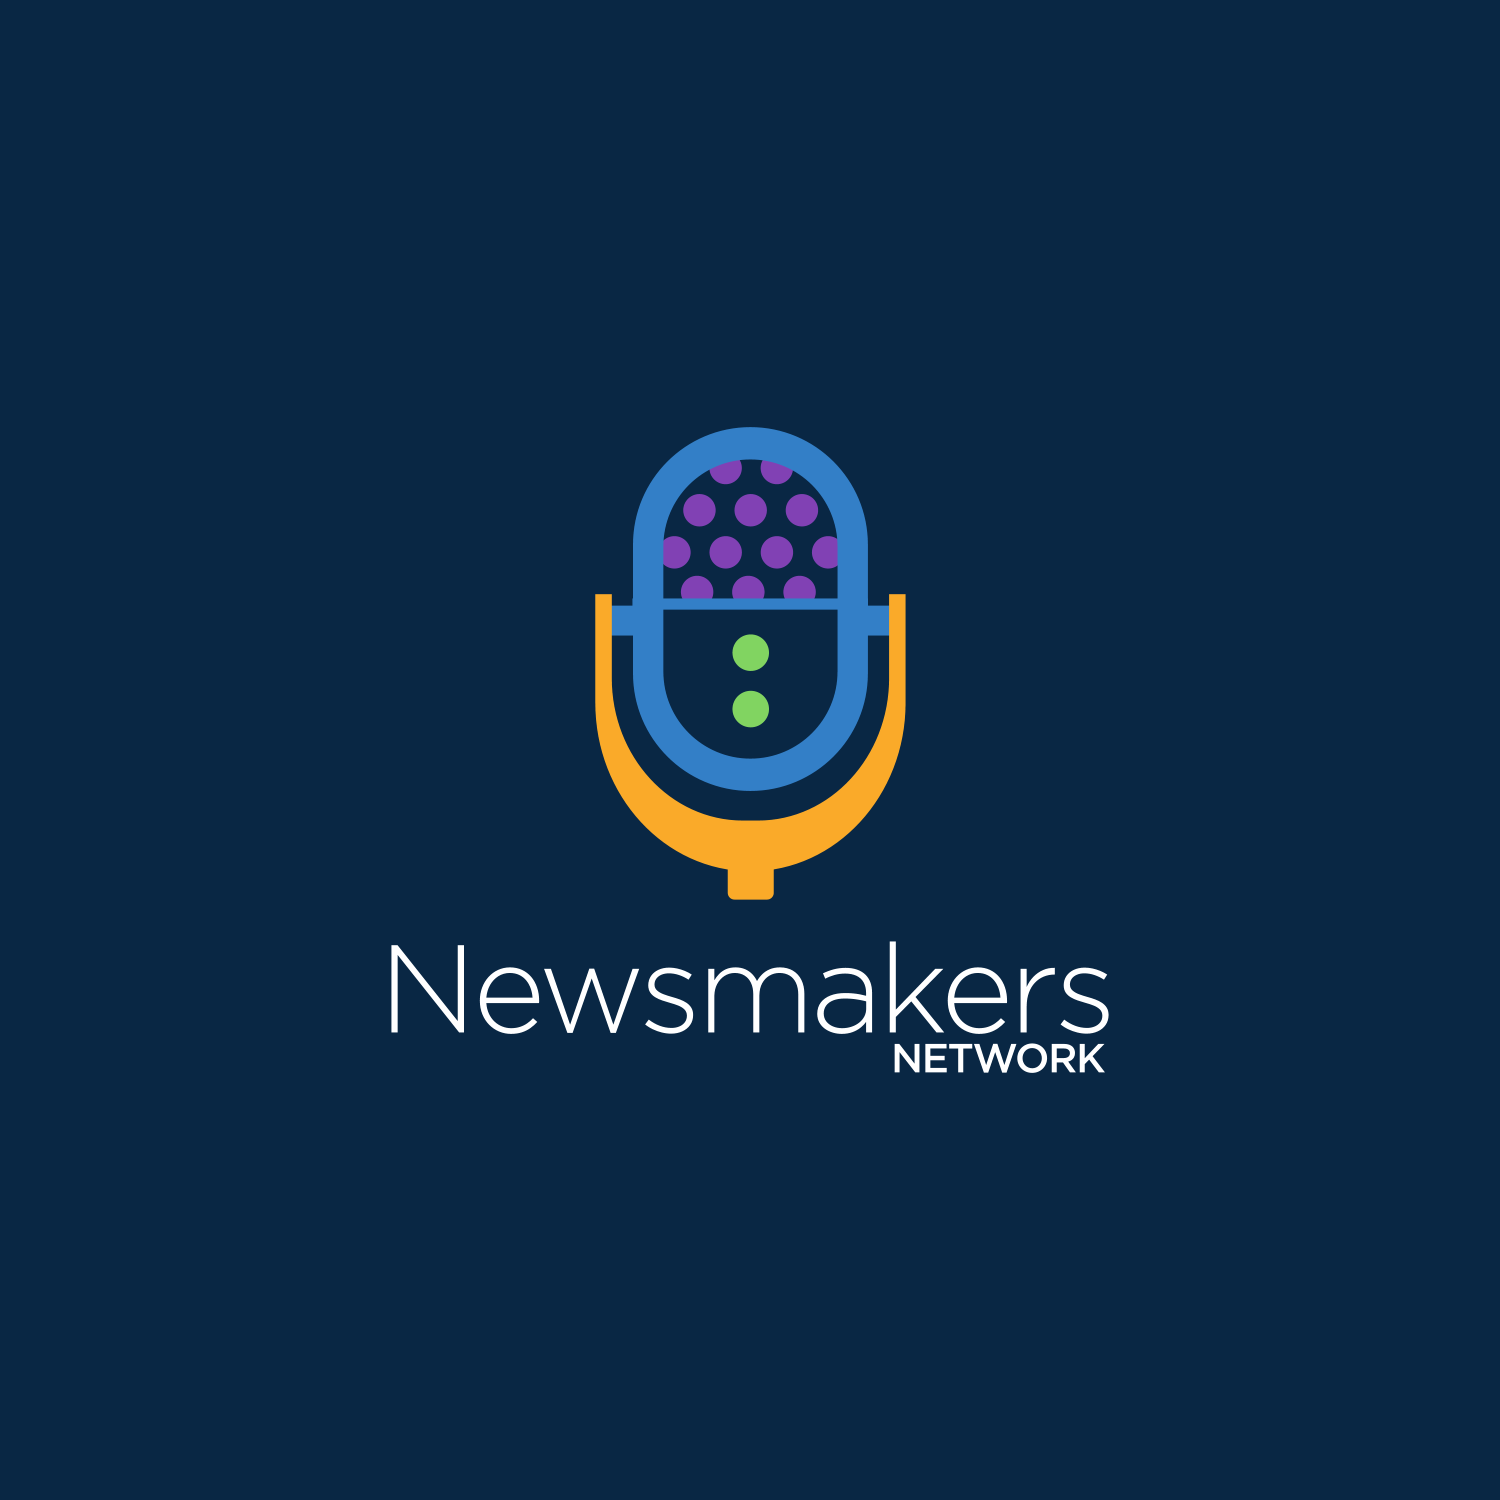 Newsmakers Network